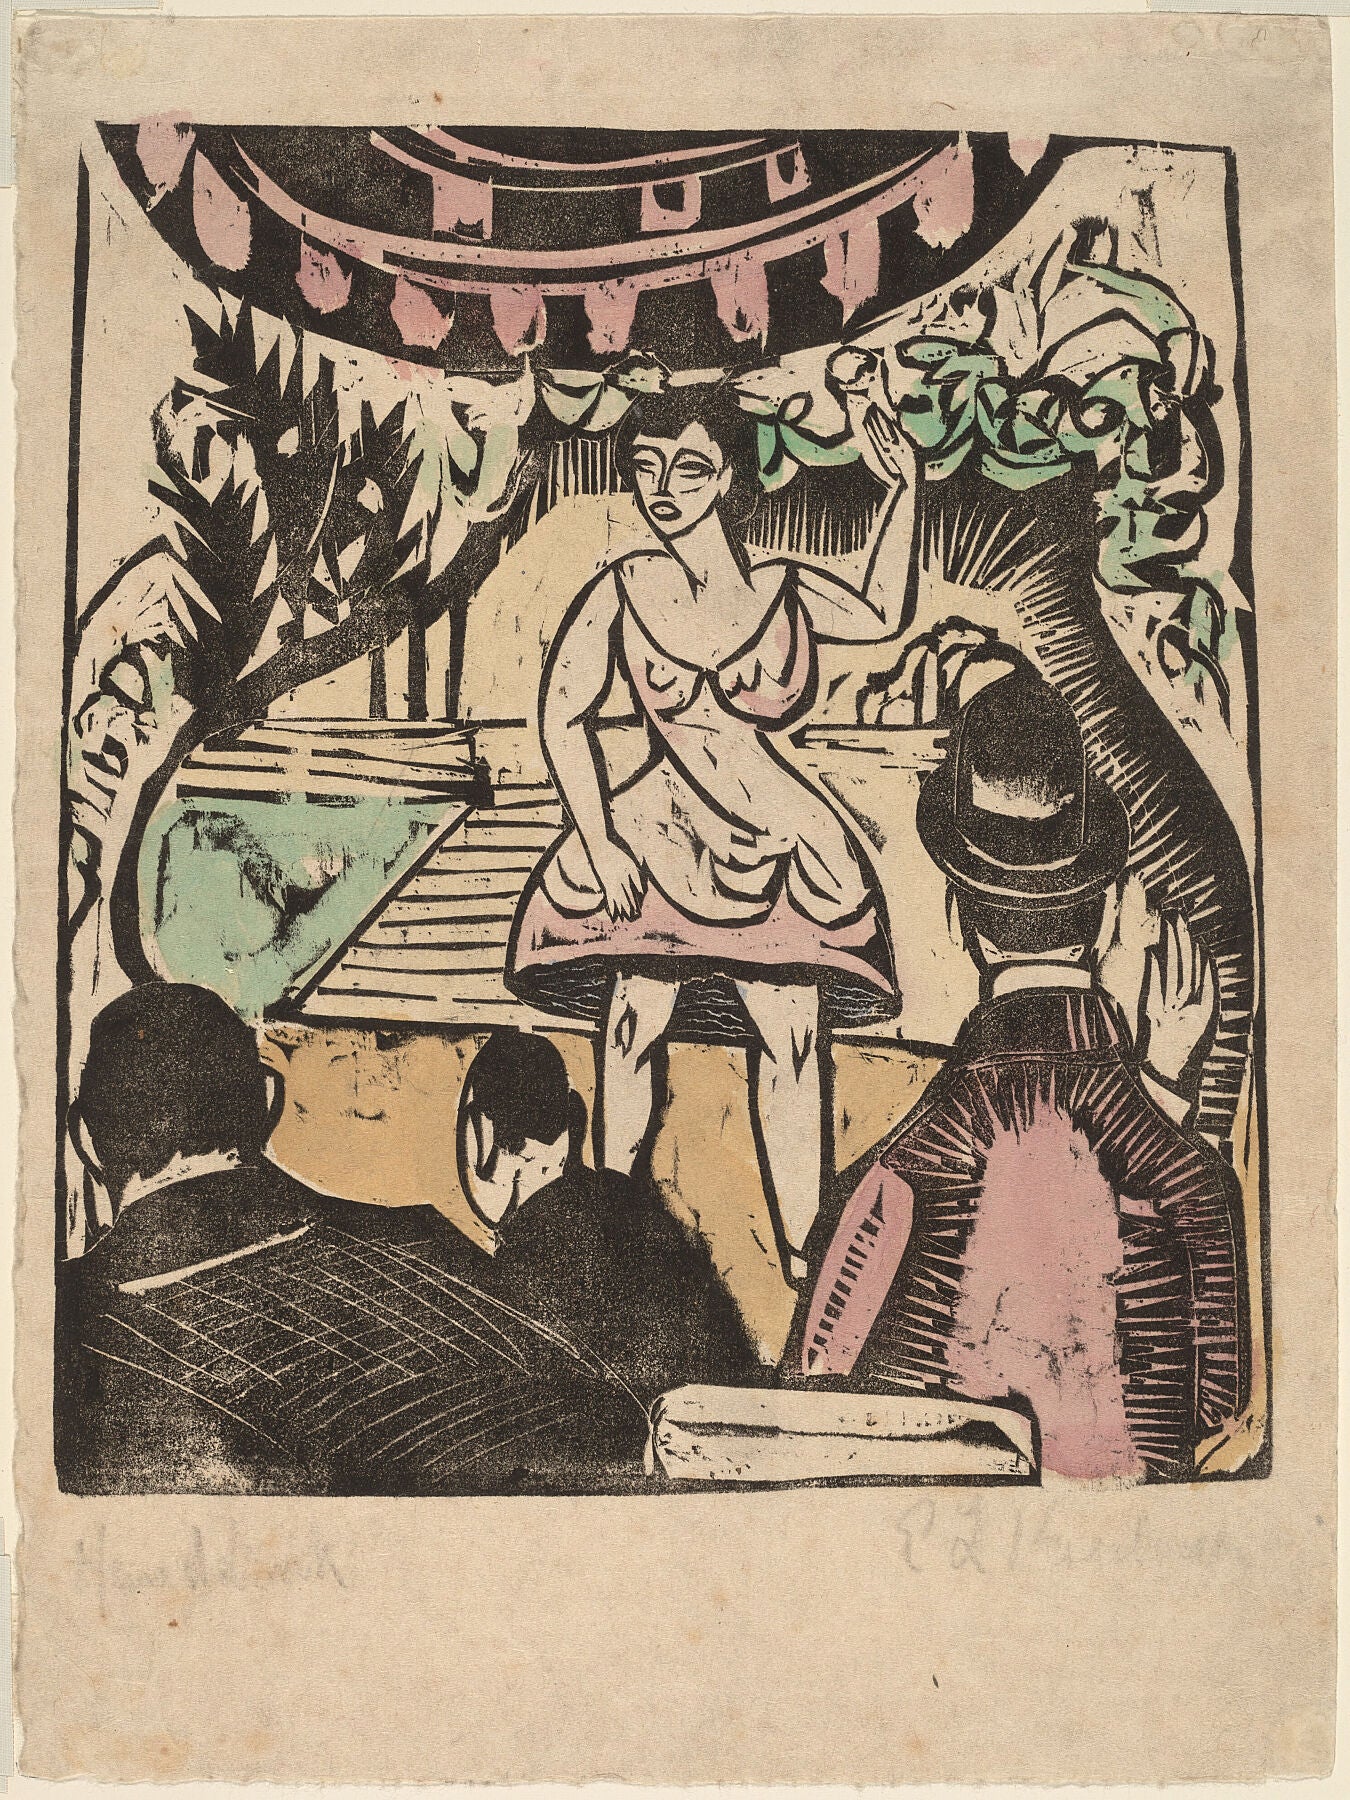 Little Variety Act with Singer by Ernst Ludwig Kirchner - c. 1909